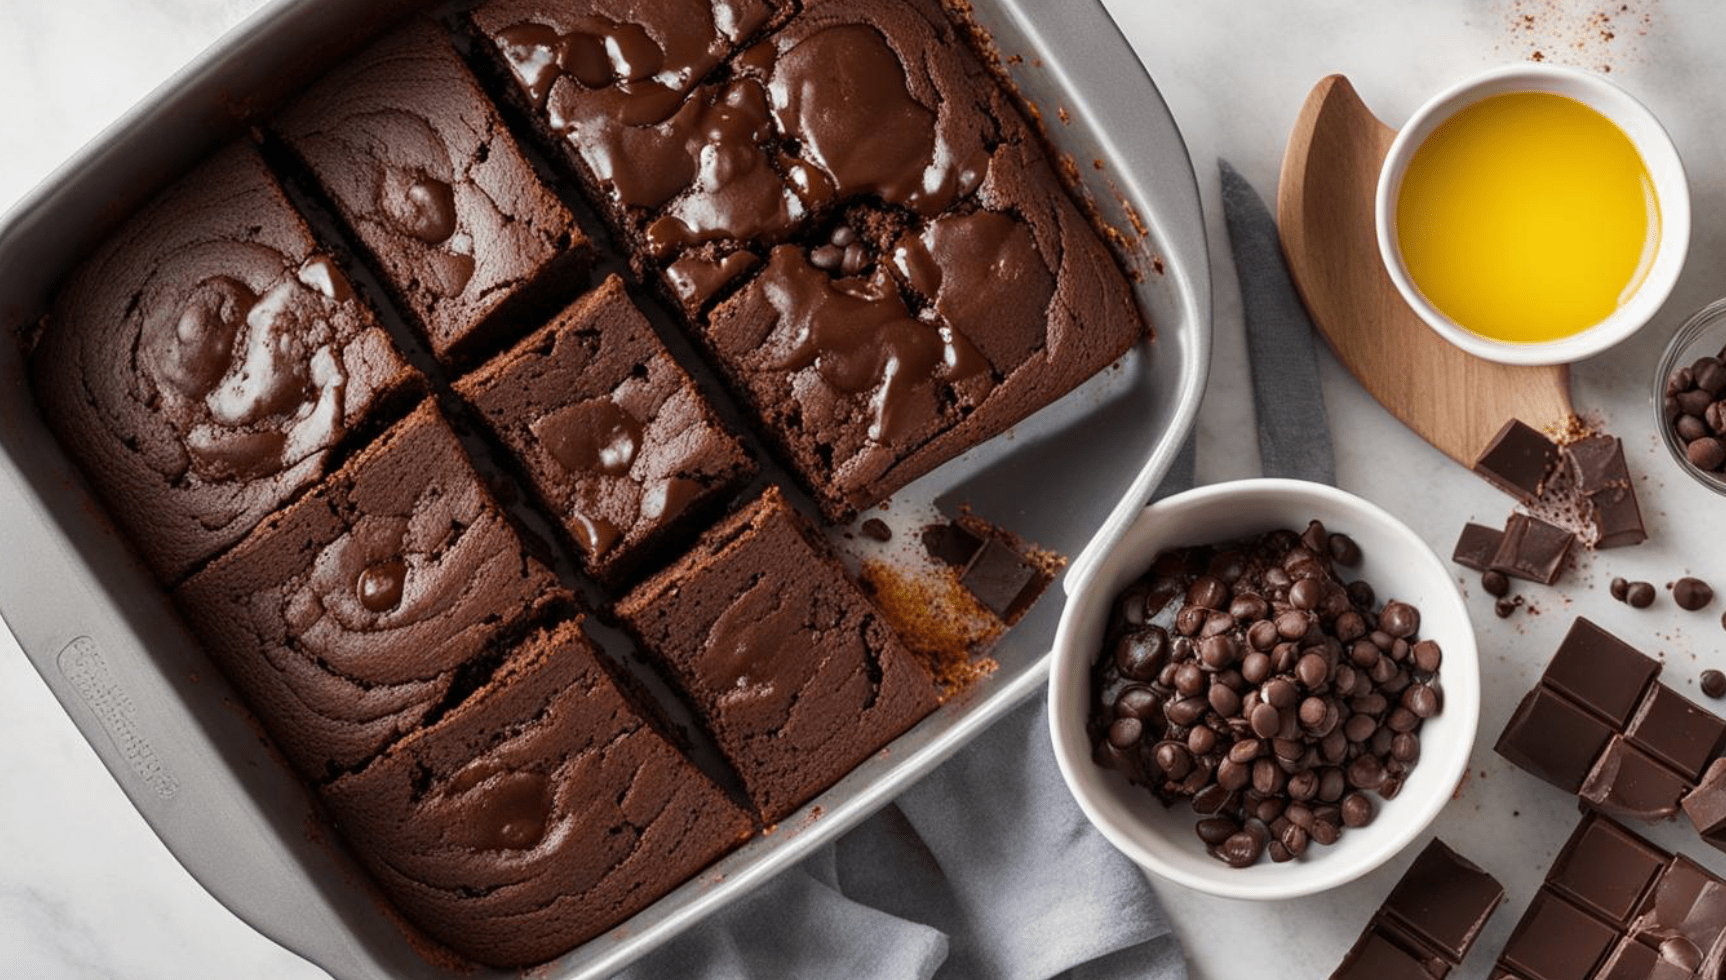 Easy Guide: How to Turn Betty Crocker Cake Mix into Brownies